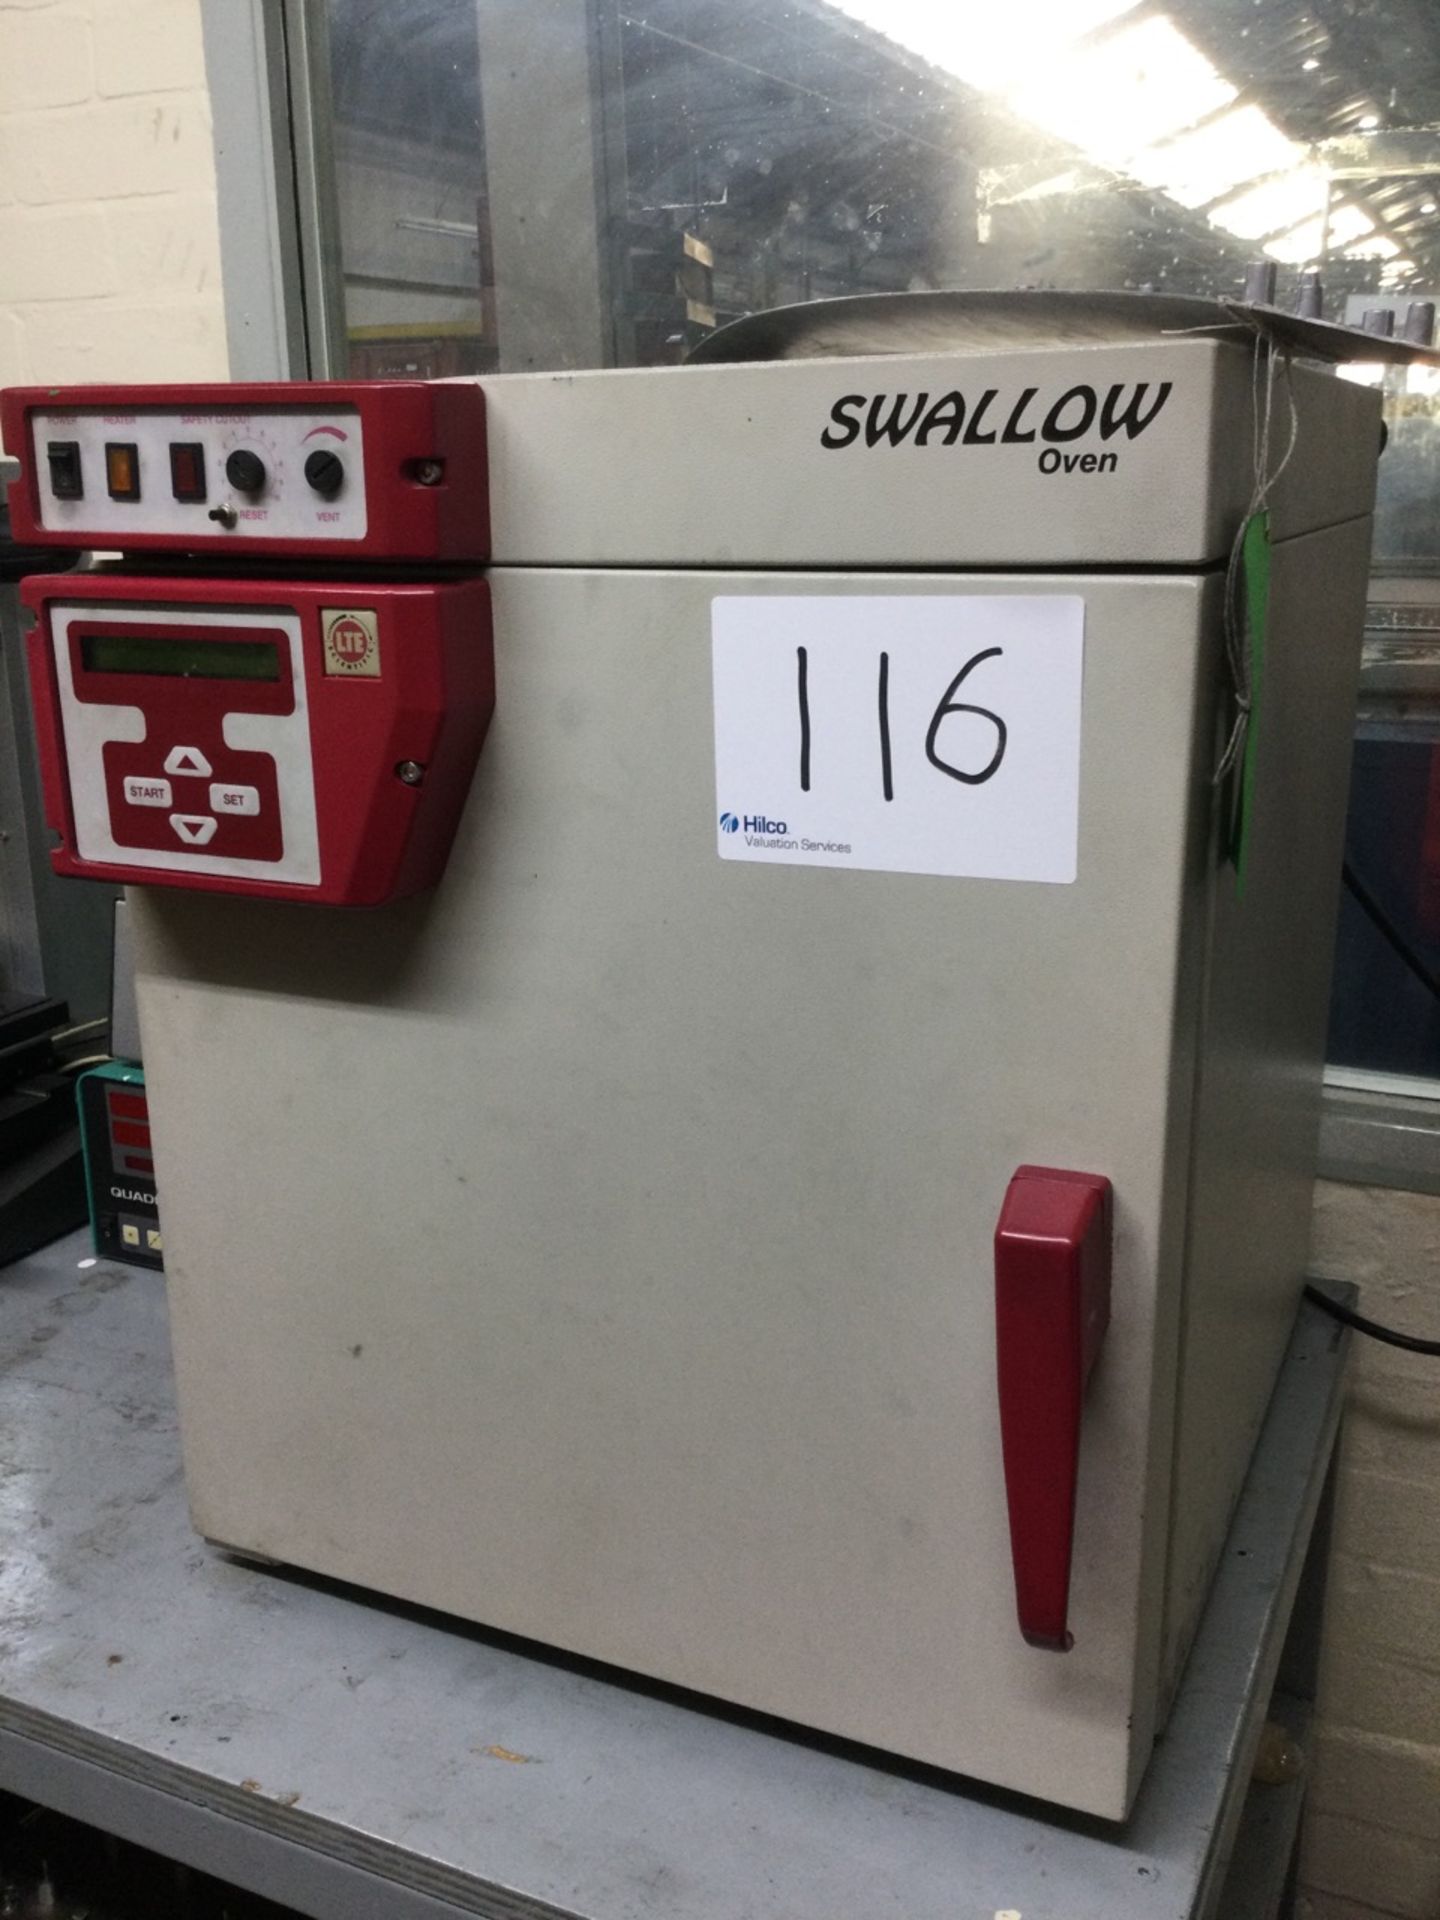 1 Swallow, Counter top oven, Serial Number: J2837